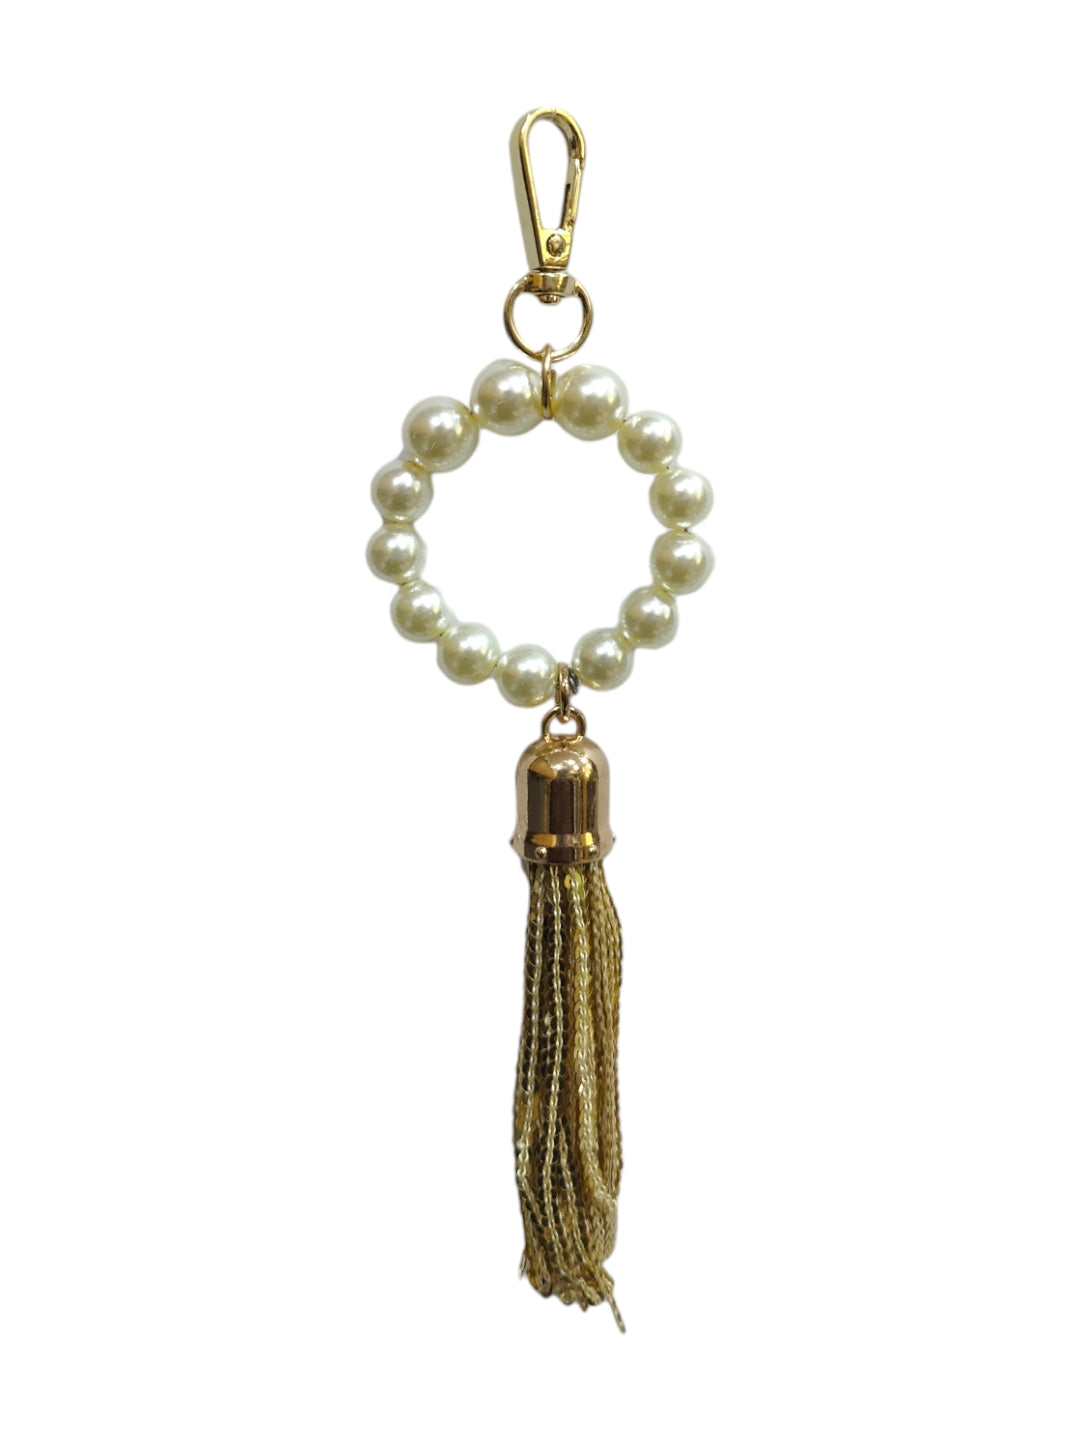 Add an elegant touch to your bag with our White Big Pearl Tassel Bag Charm. 